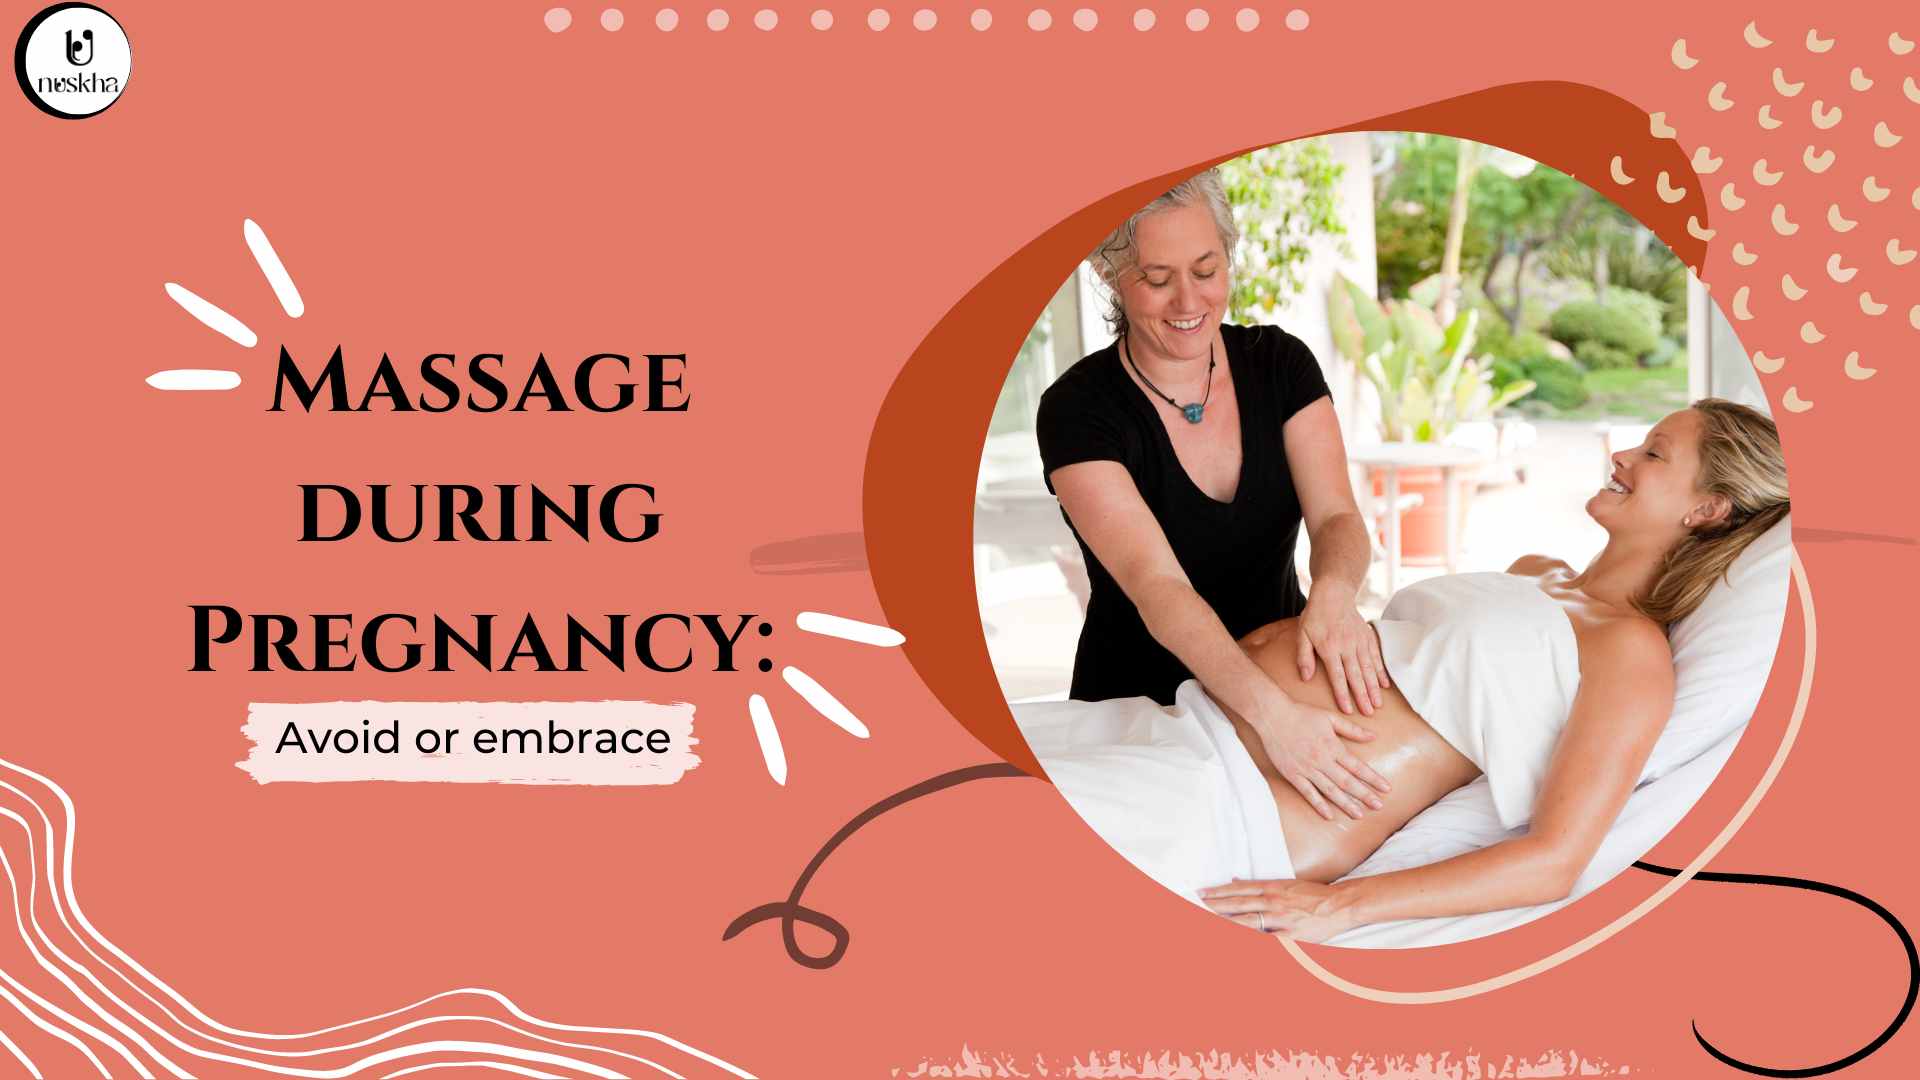 Massage during Pregnancy: Avoid or embrace